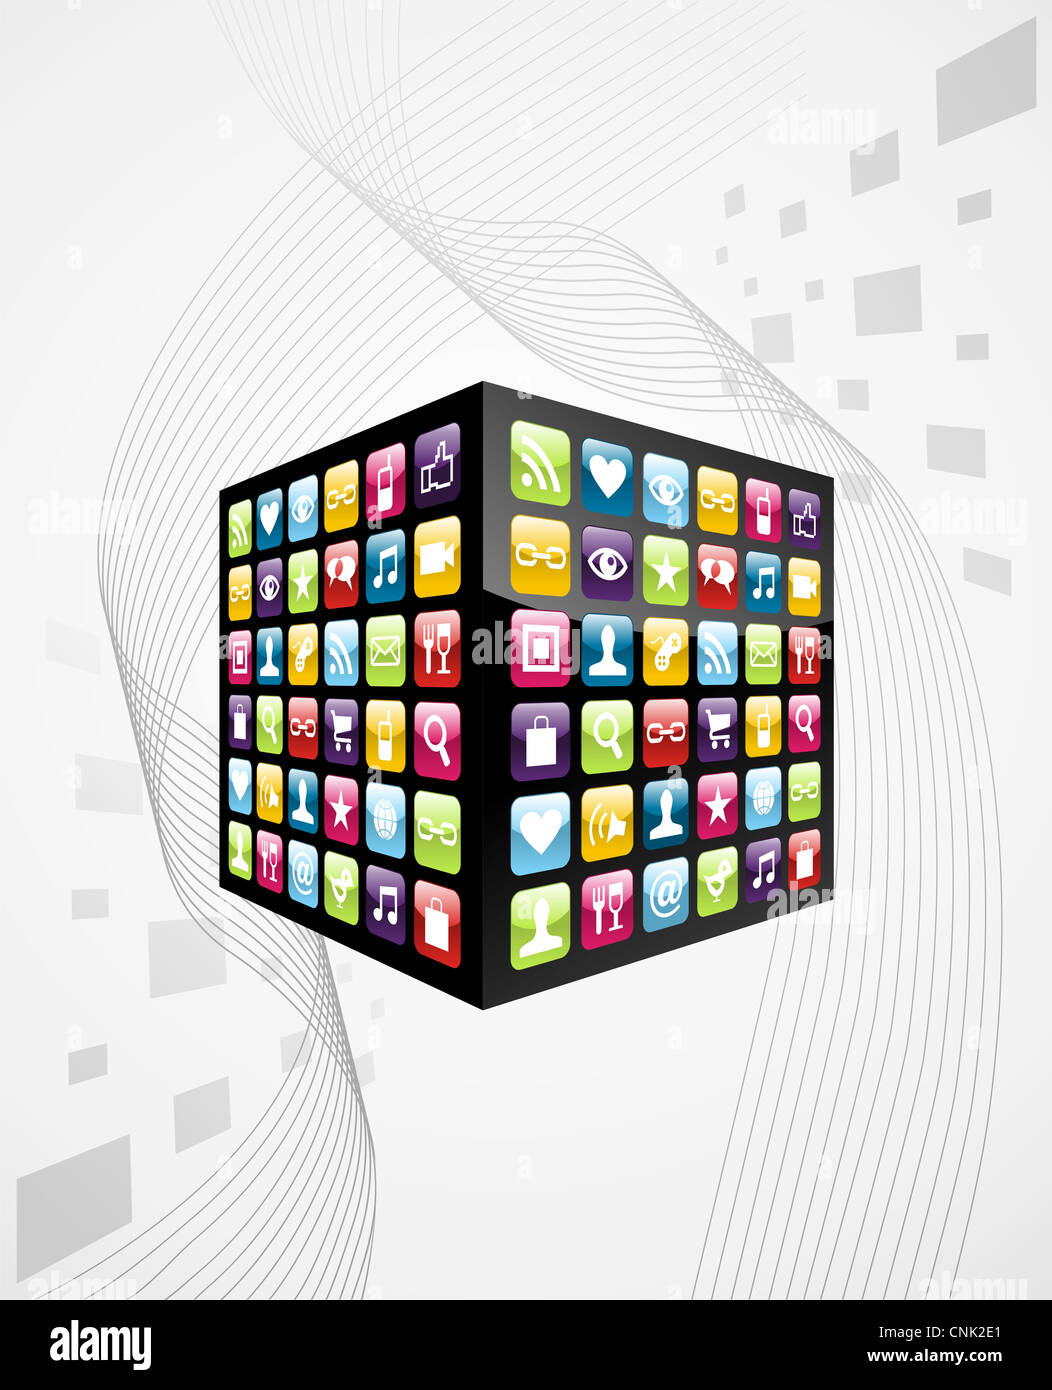 Iphone application icons in cube shape on grey background. Vector file layered for easy manipulation and customisation. Stock Photo